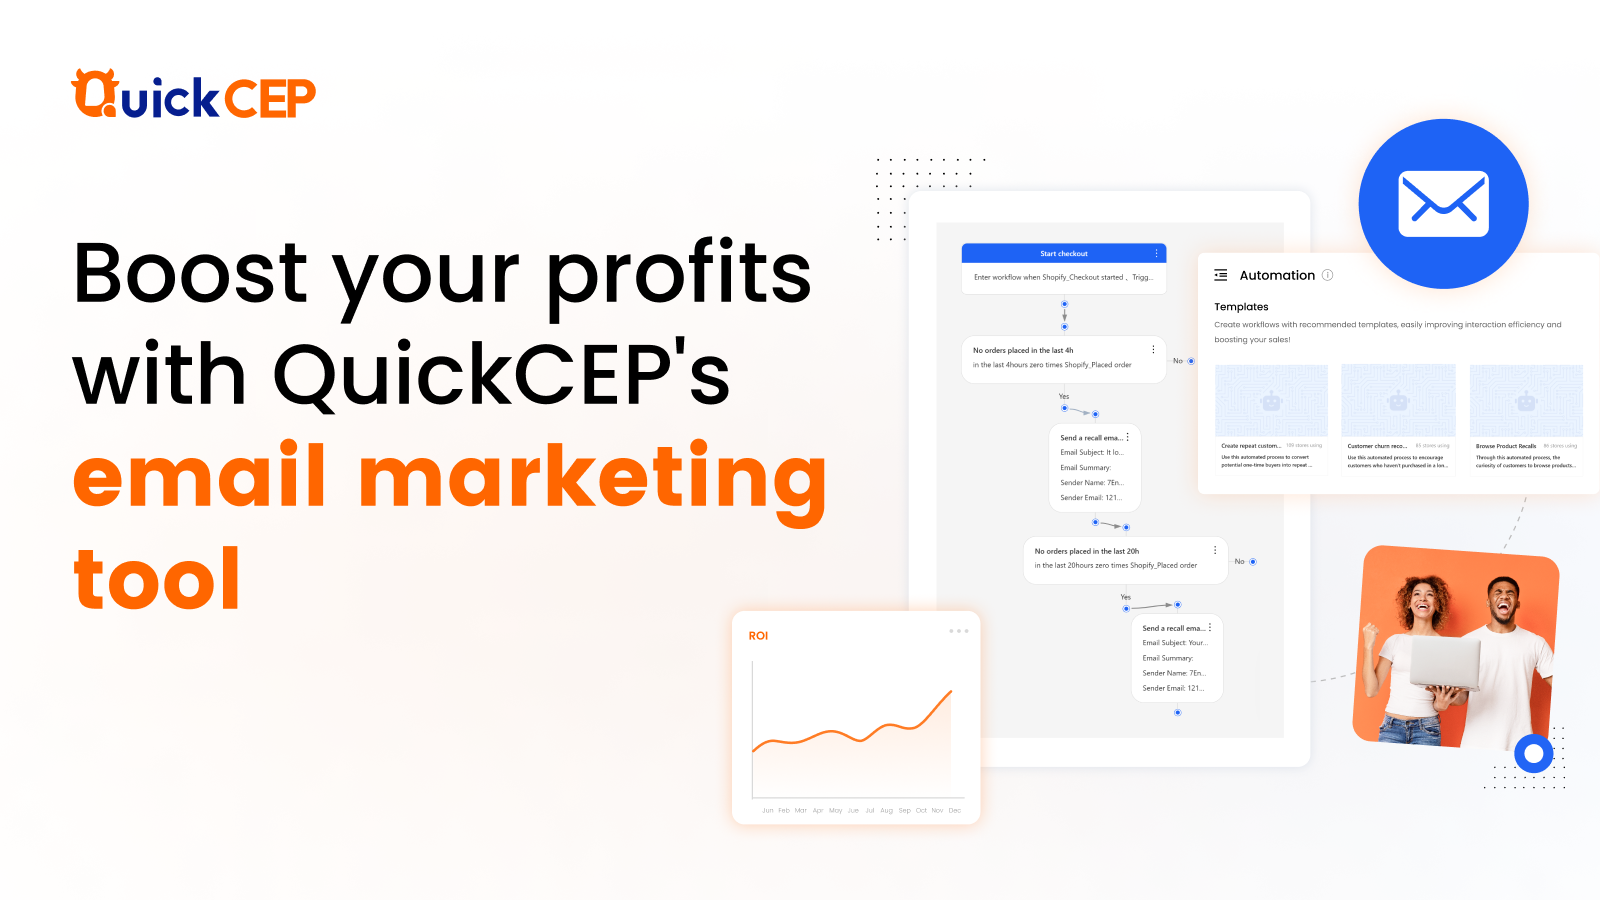 Boost your sales with QuickCEP's email marketing tools